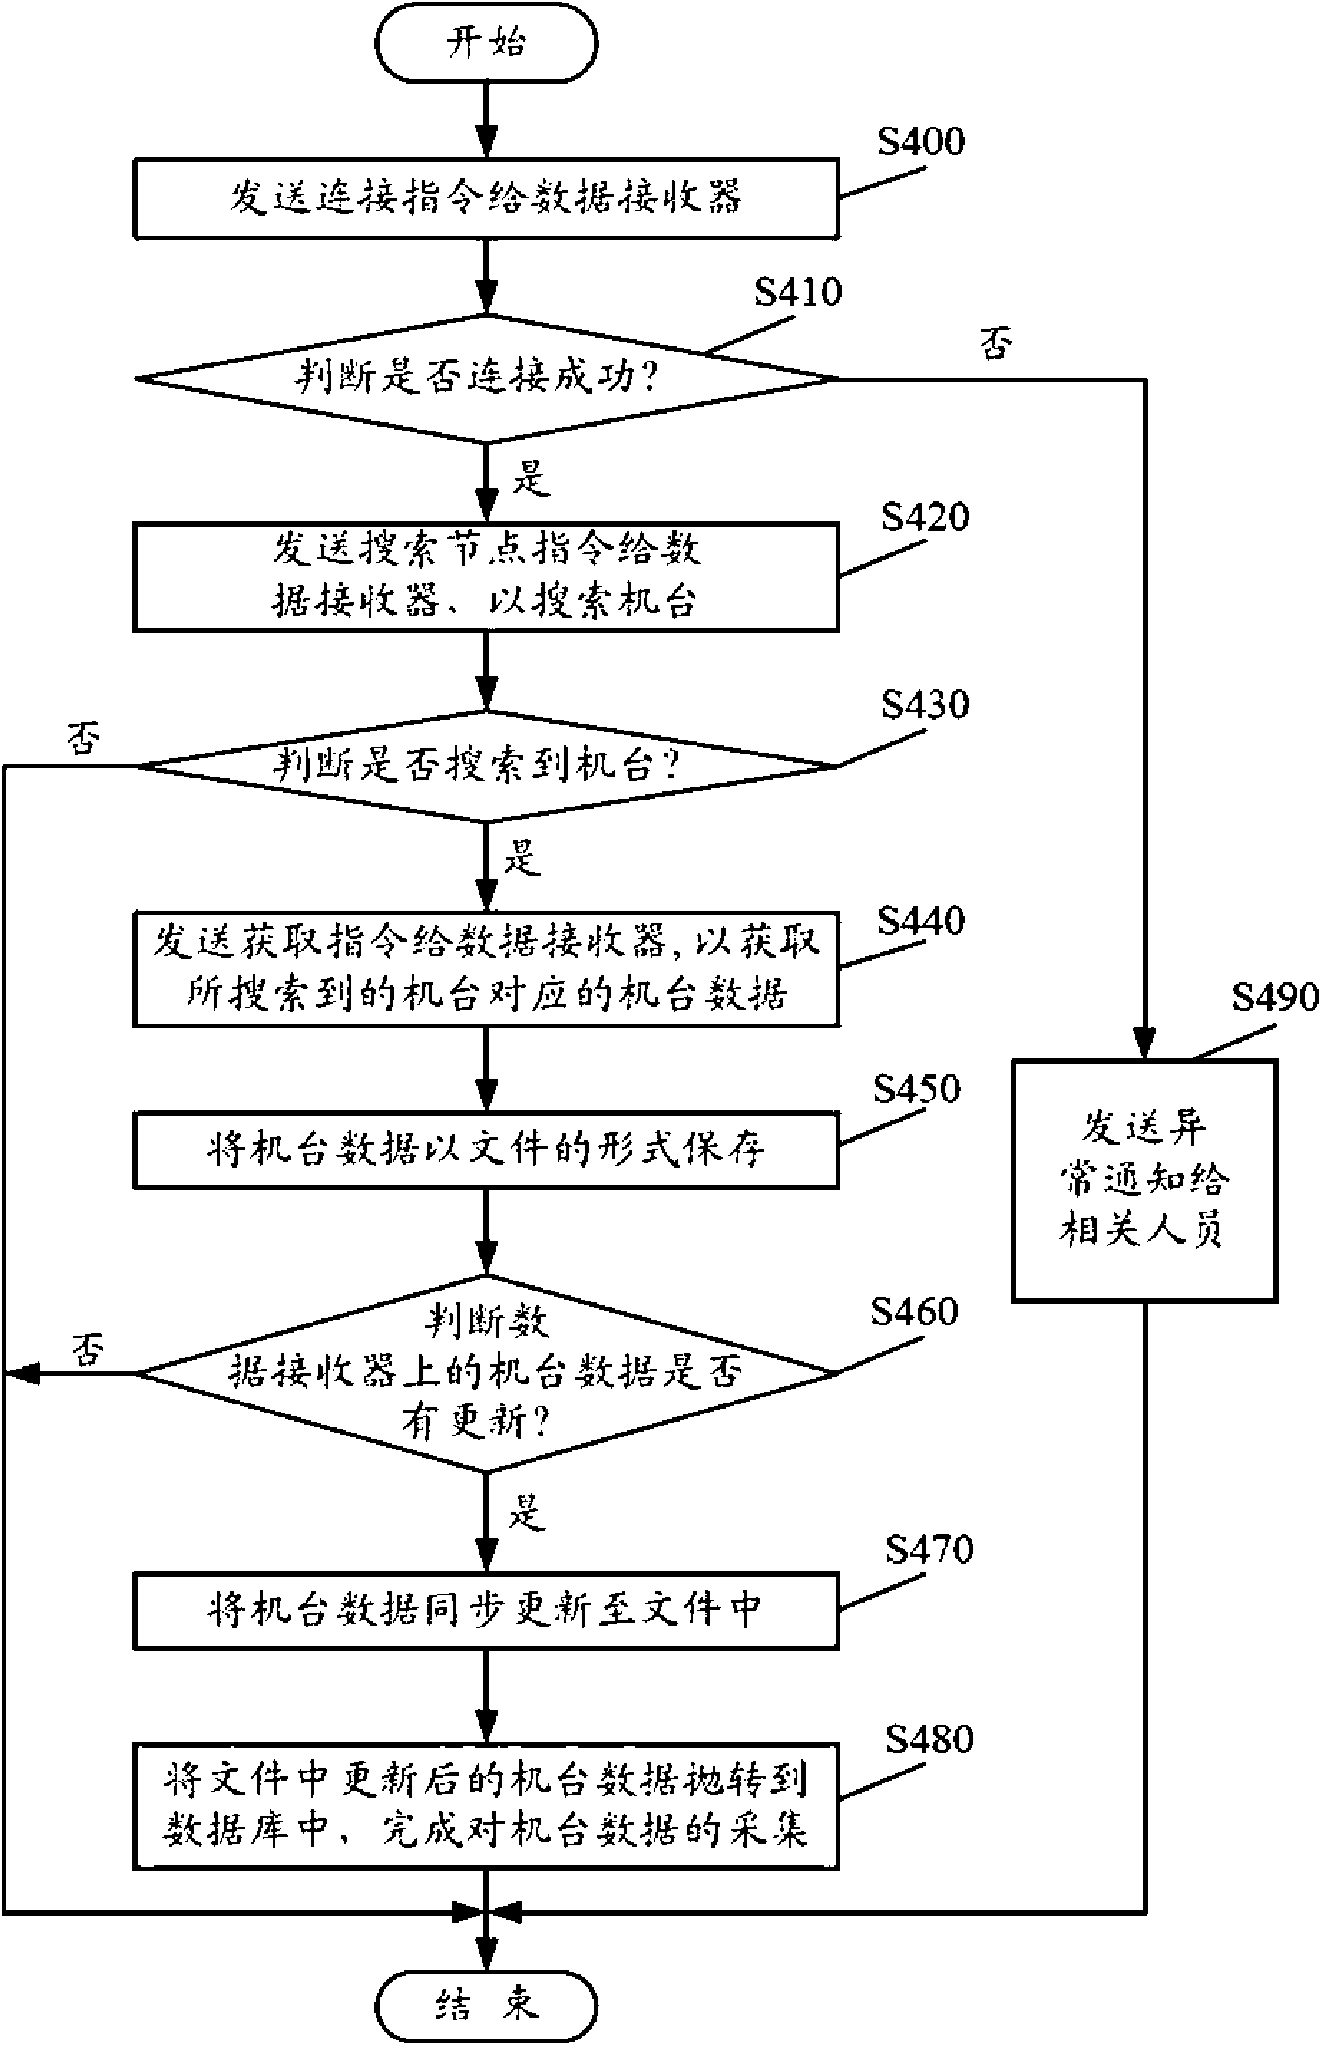 Machine data acquisition system and method